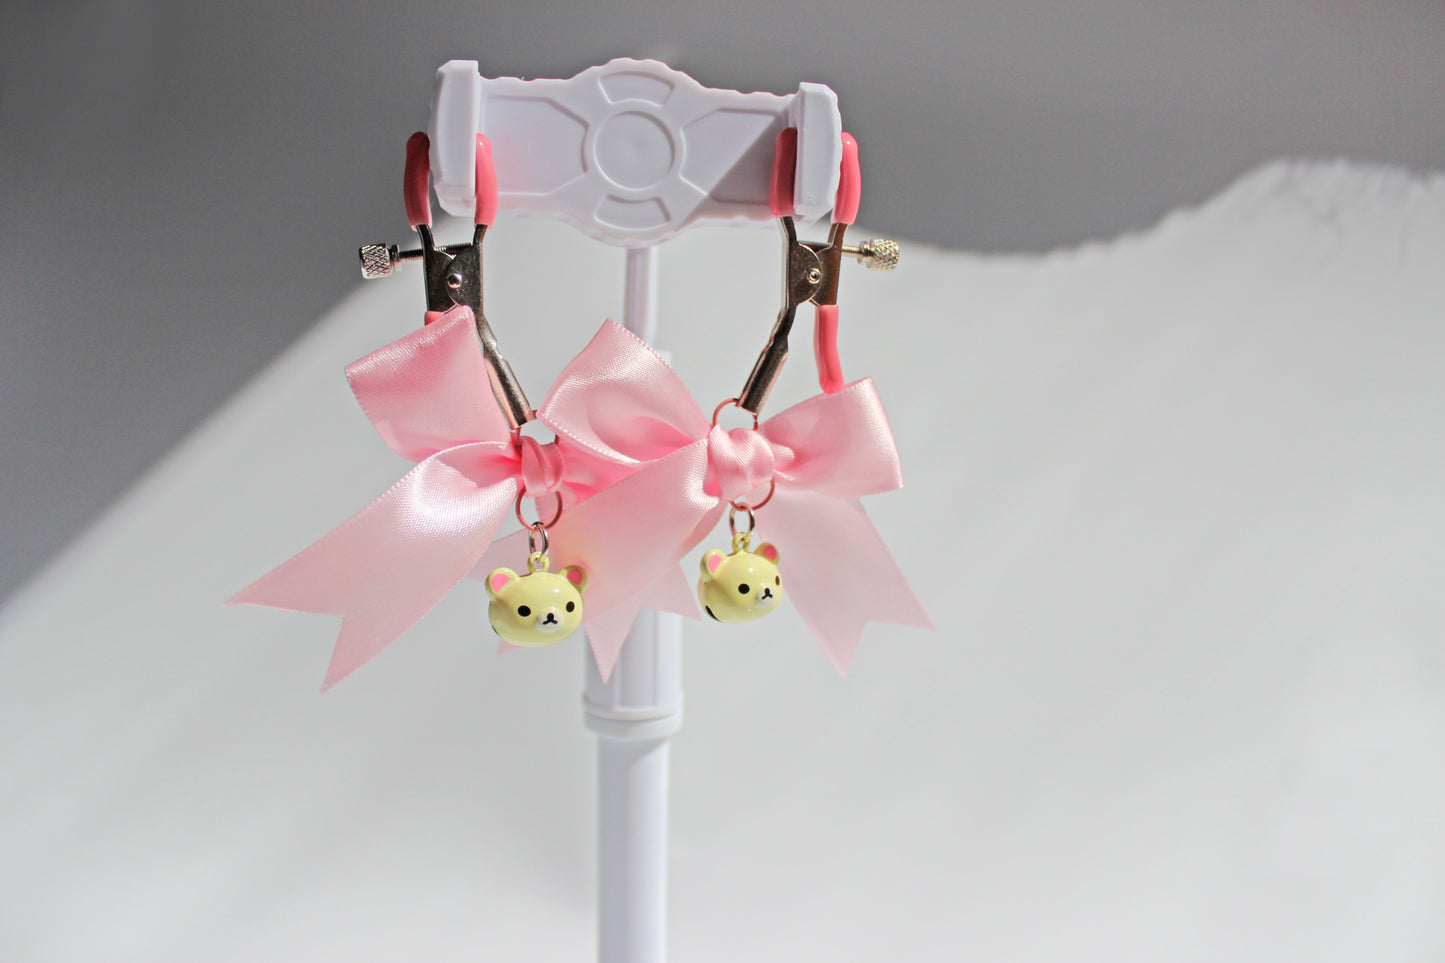 Silver nipple clamps with pink pvc caps and adjustable tension screw and pink bows and white bear heads hanging off the clamps being held up on a white background.